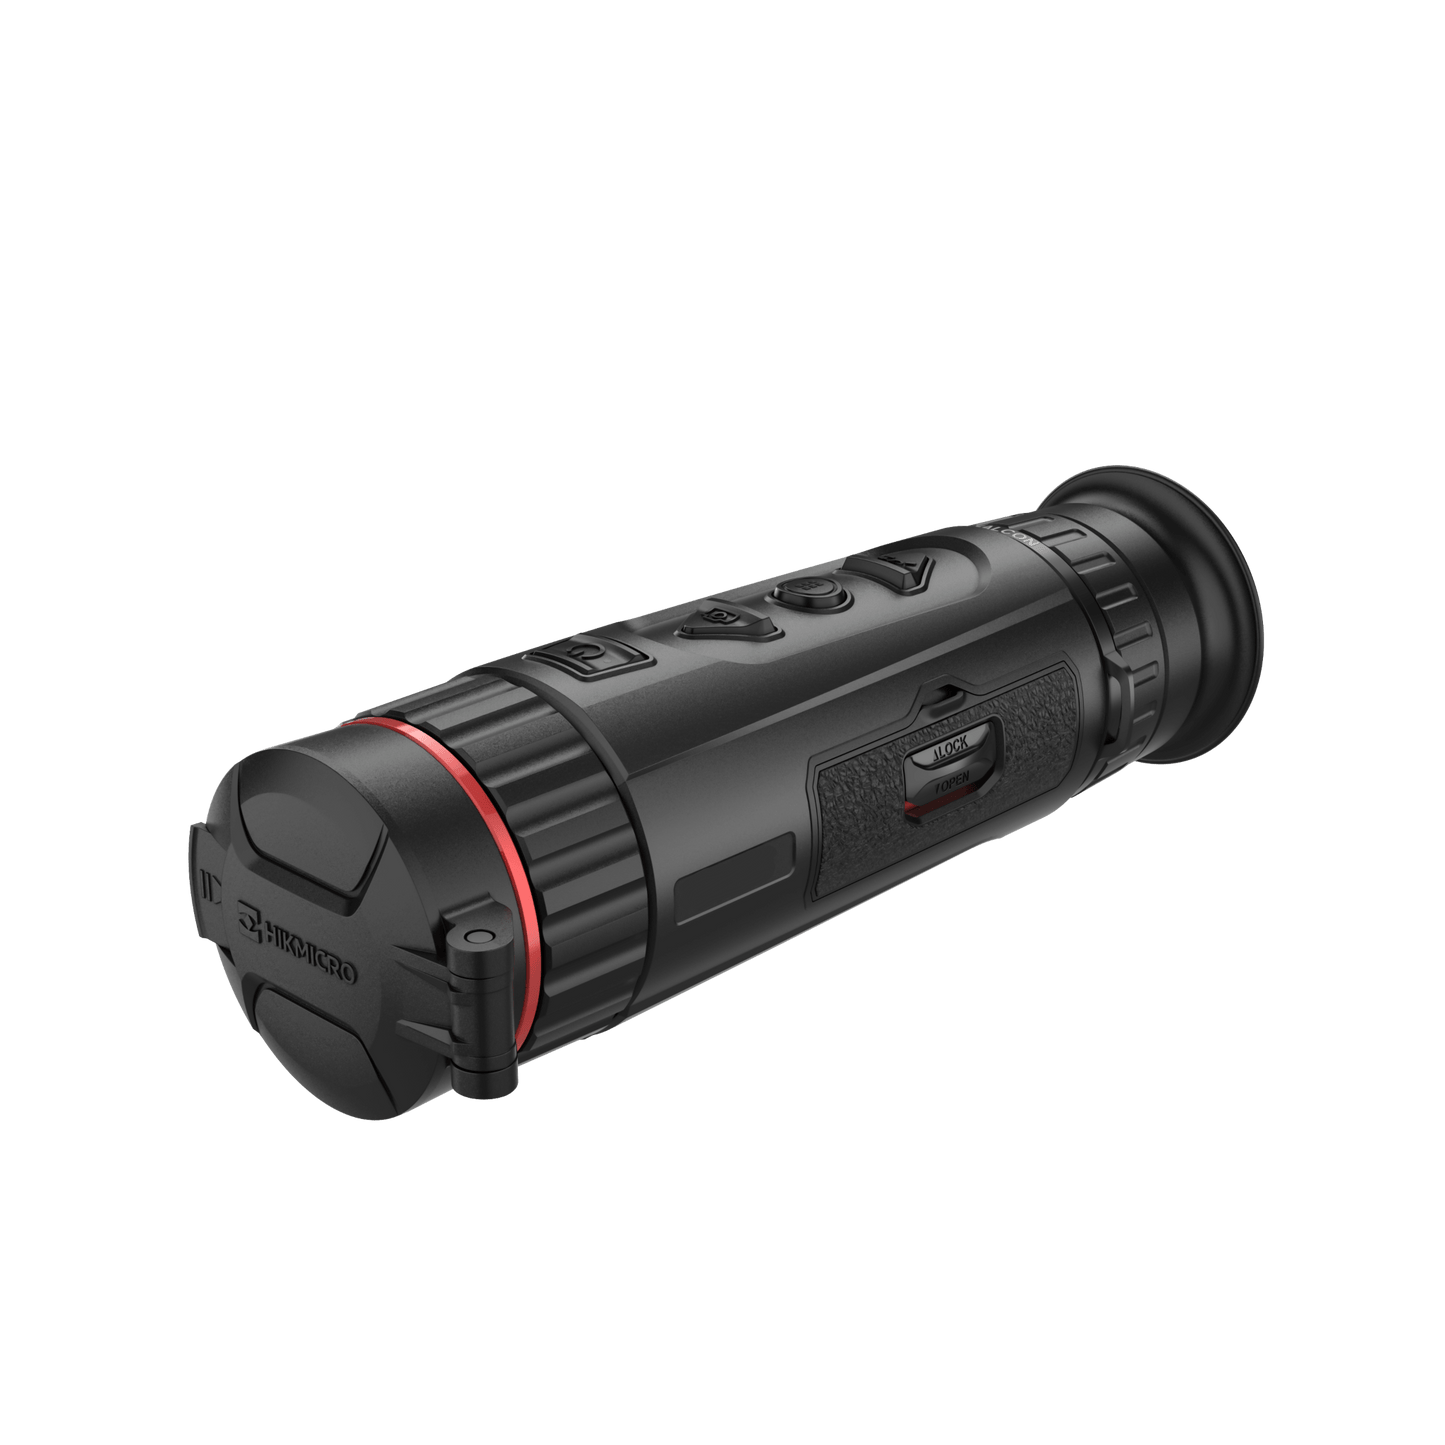 HikMicro Thermal Imaging Monocular for Sale - HikMicro Falcon Series FH25 - HM-TS43-25XG_W-FH25 - Front Left View